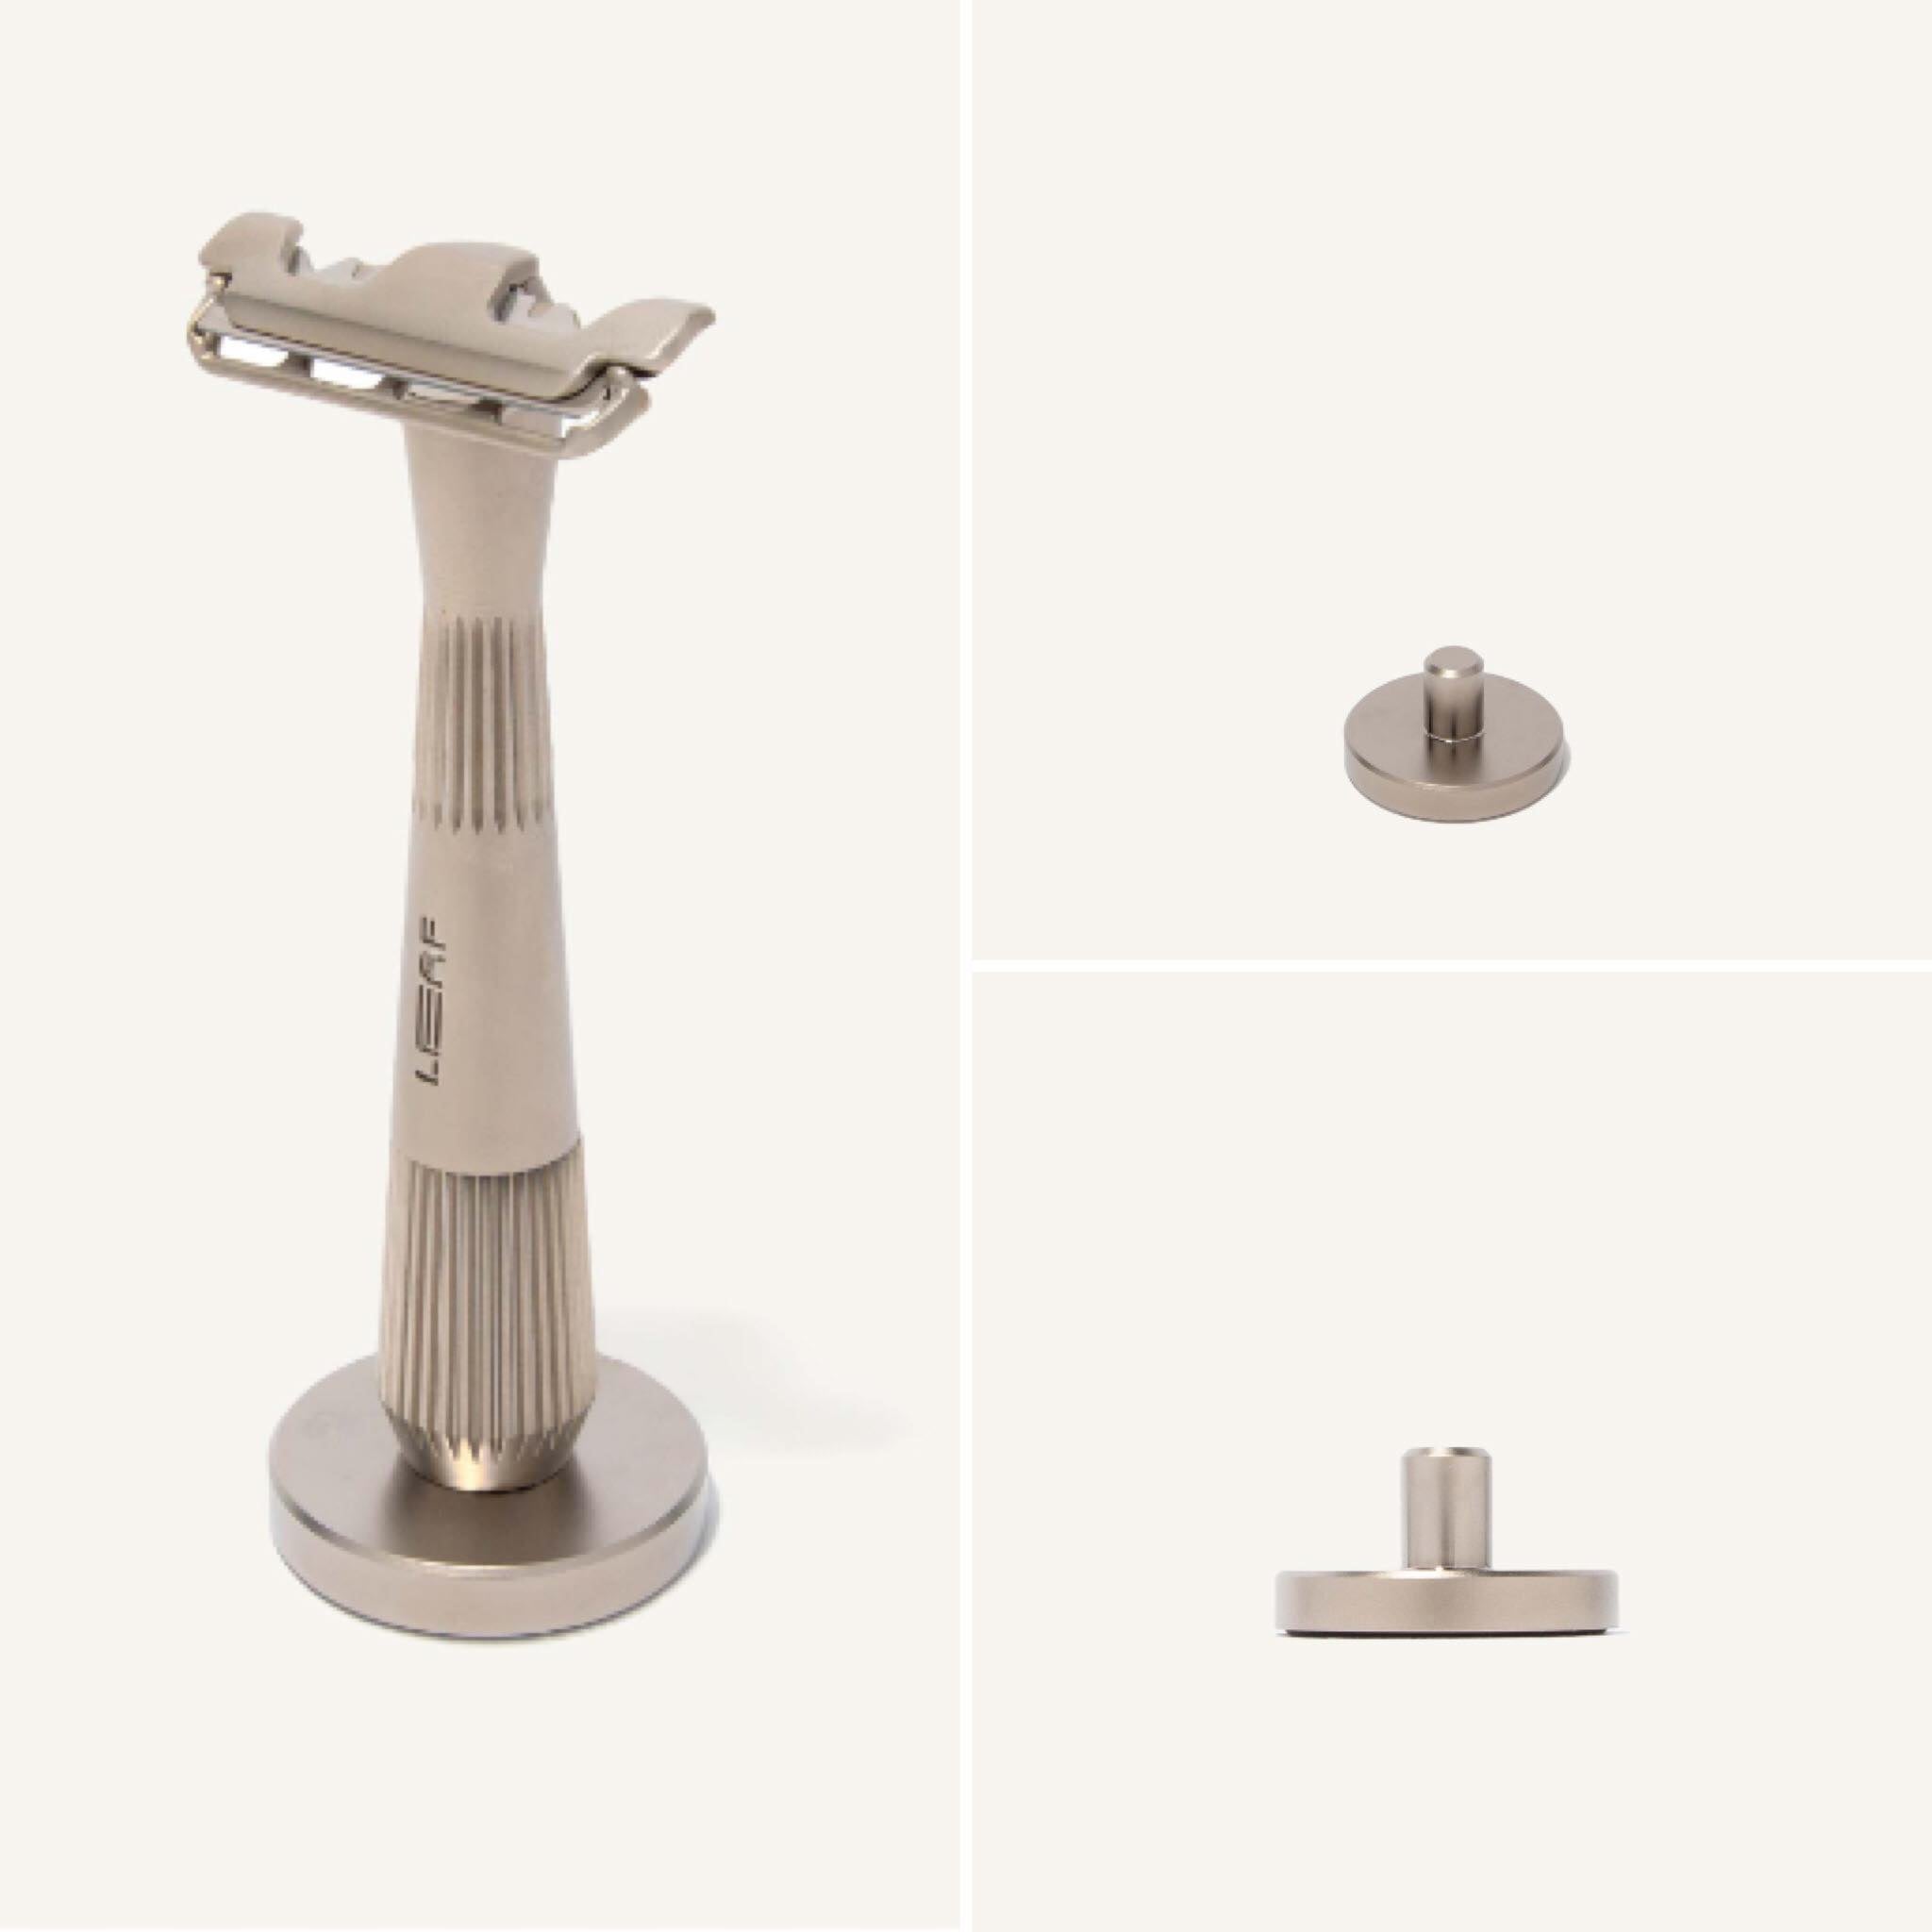 Display your silver twig or thorn razor proudly in this convenient stand designed with helpful features like an embedded rubber foot so that it stays in place.